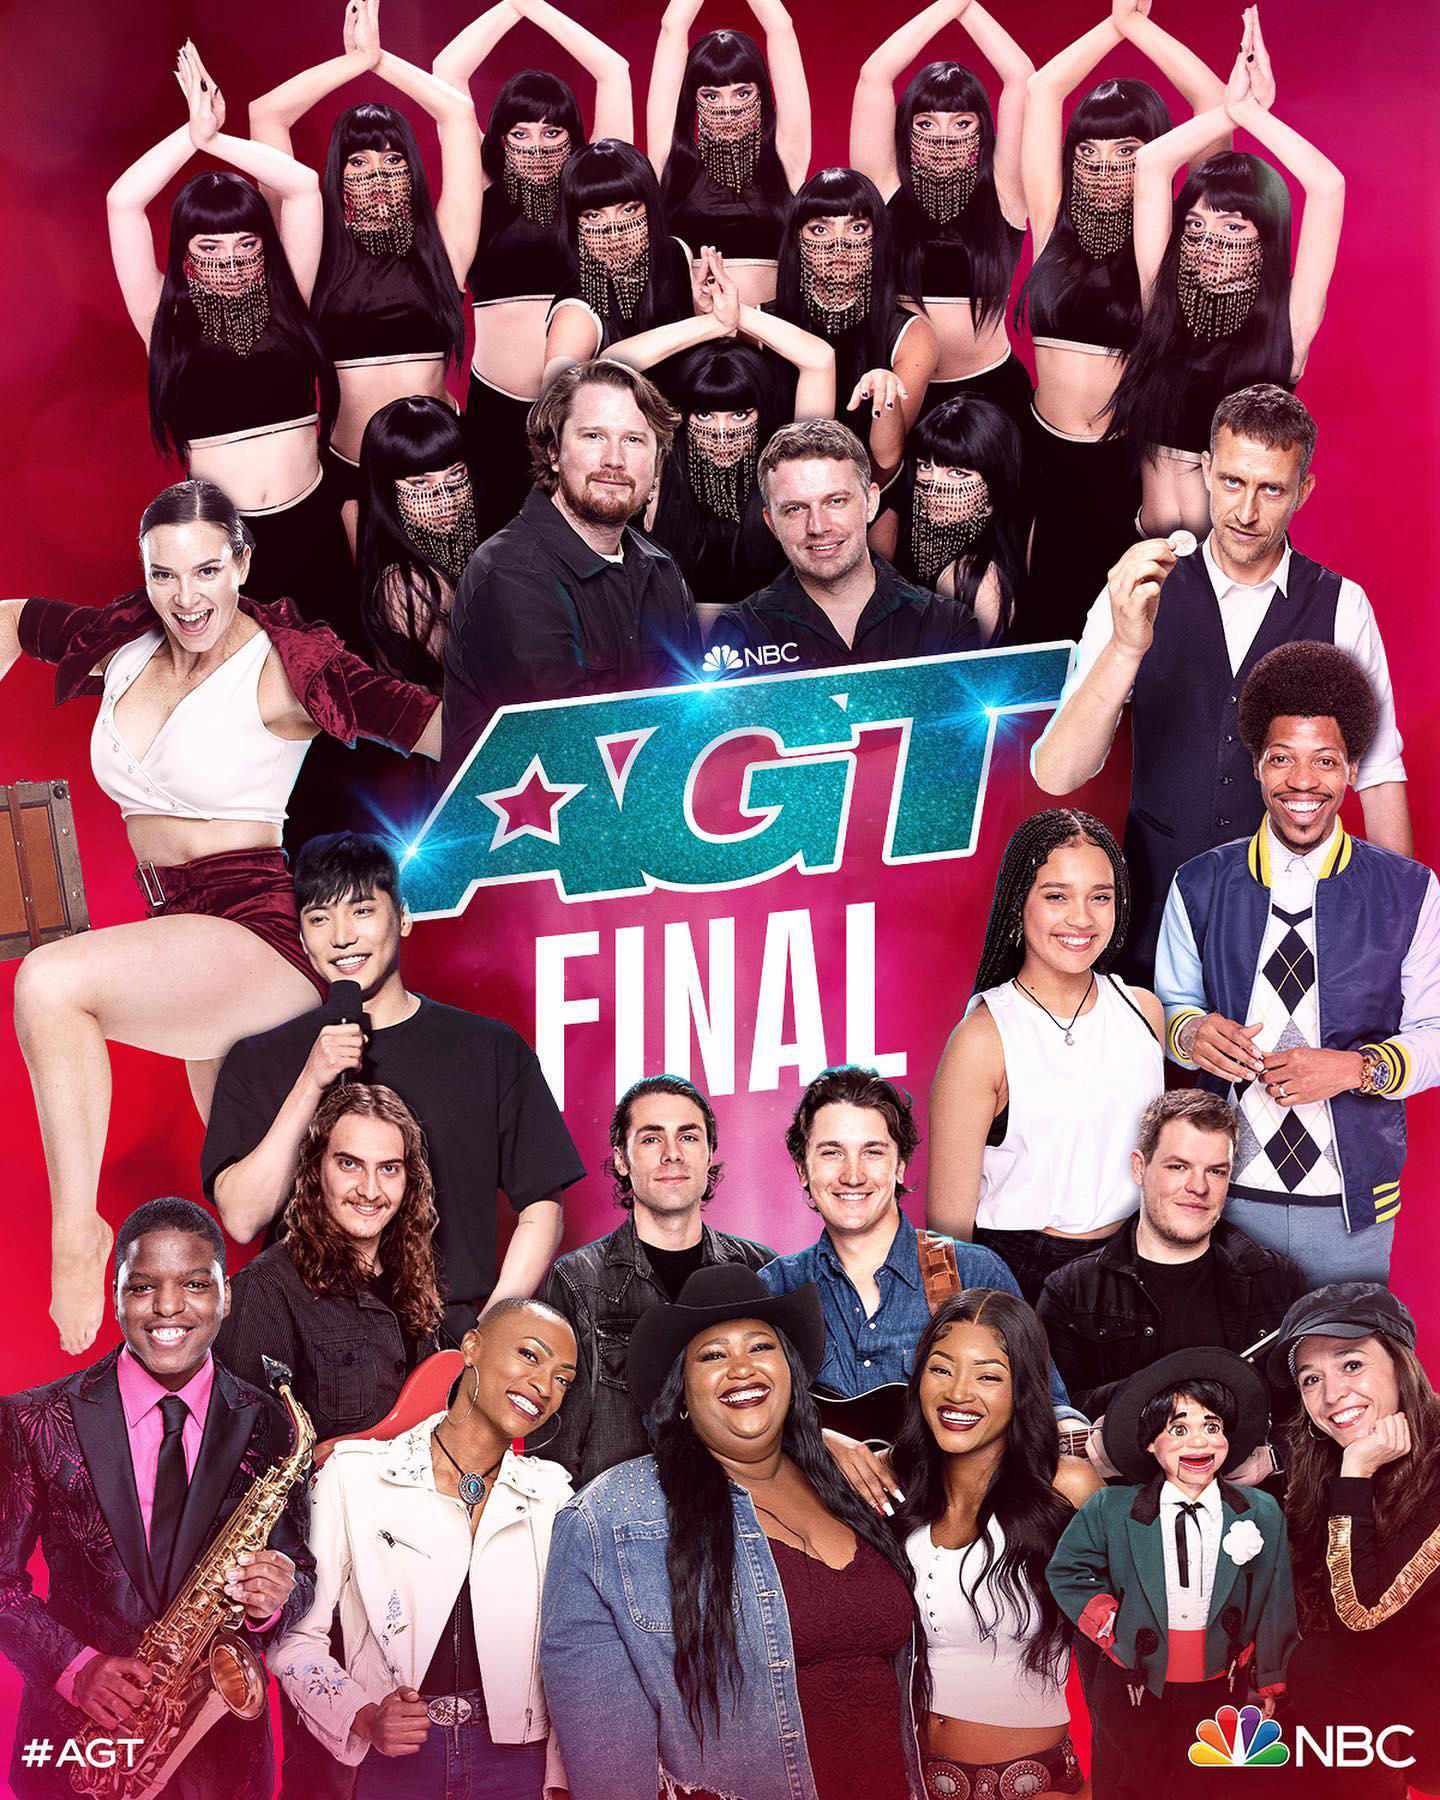 America's Got Talent - AGT - now that's a good looking (and talented) group